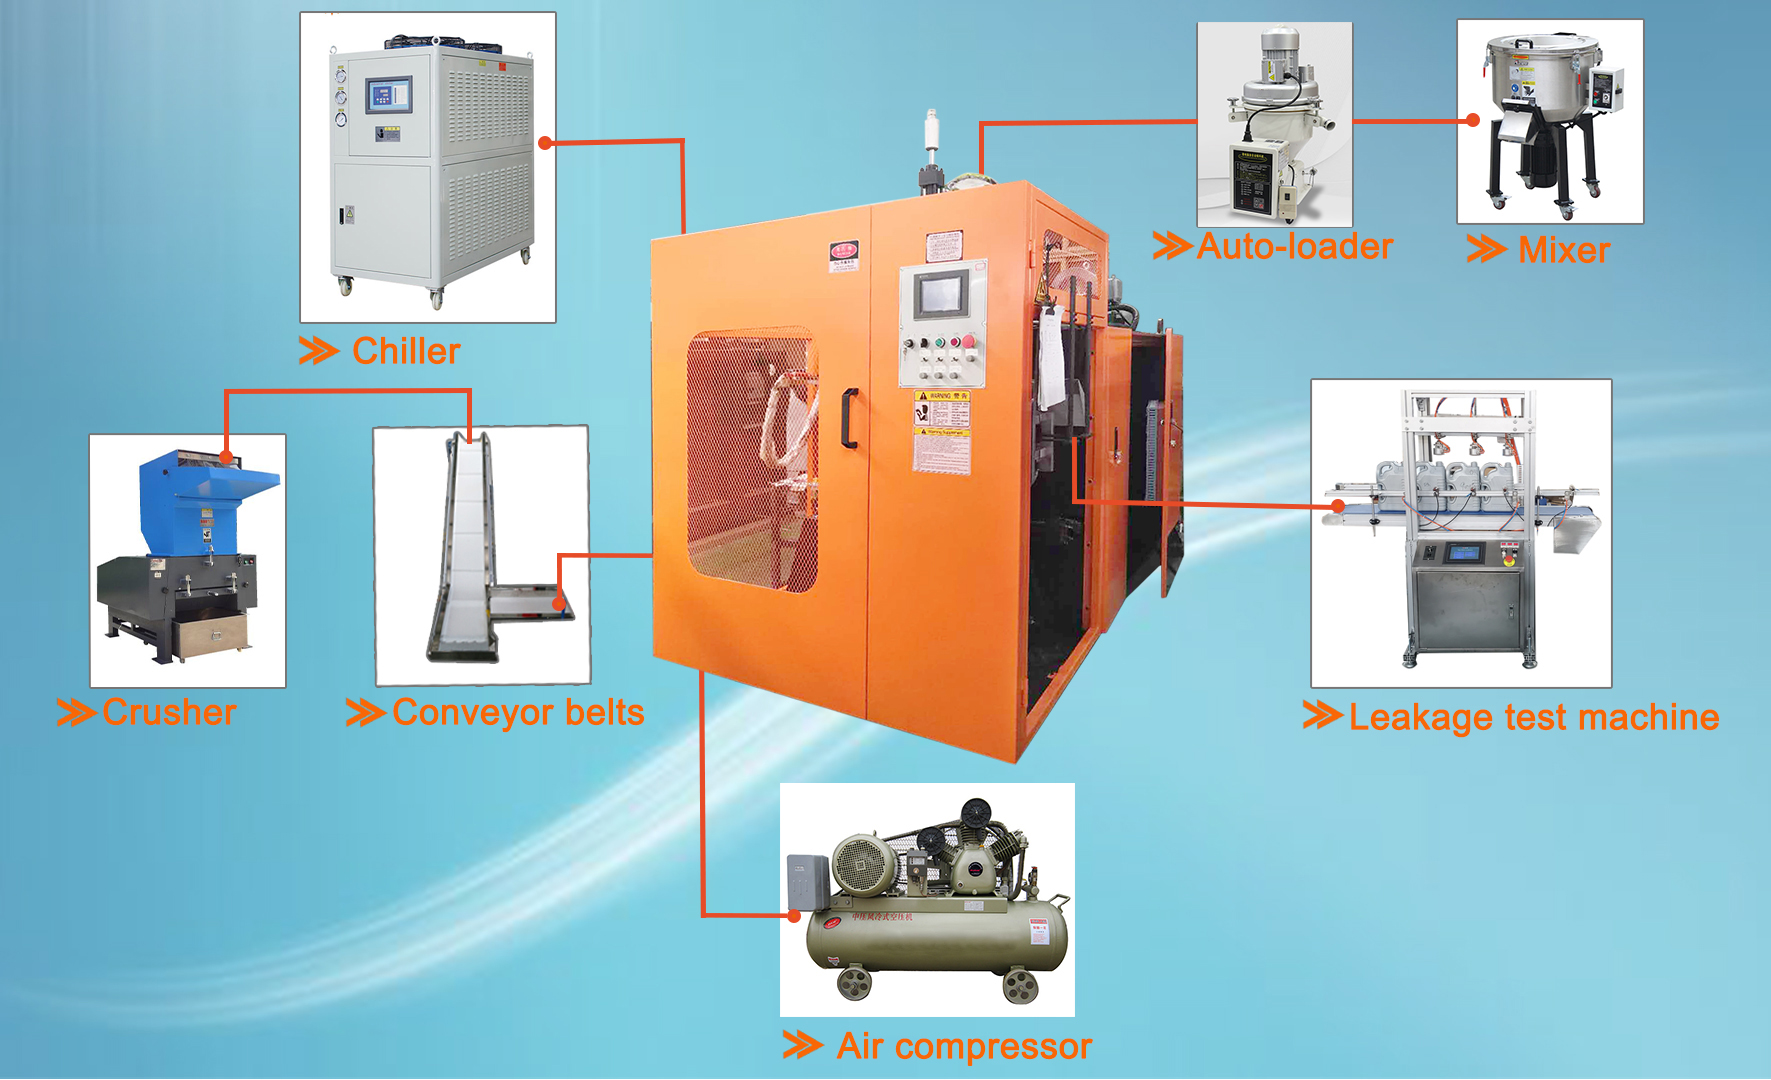 How to use the extrusion blow molding machine reasonably in the production process?